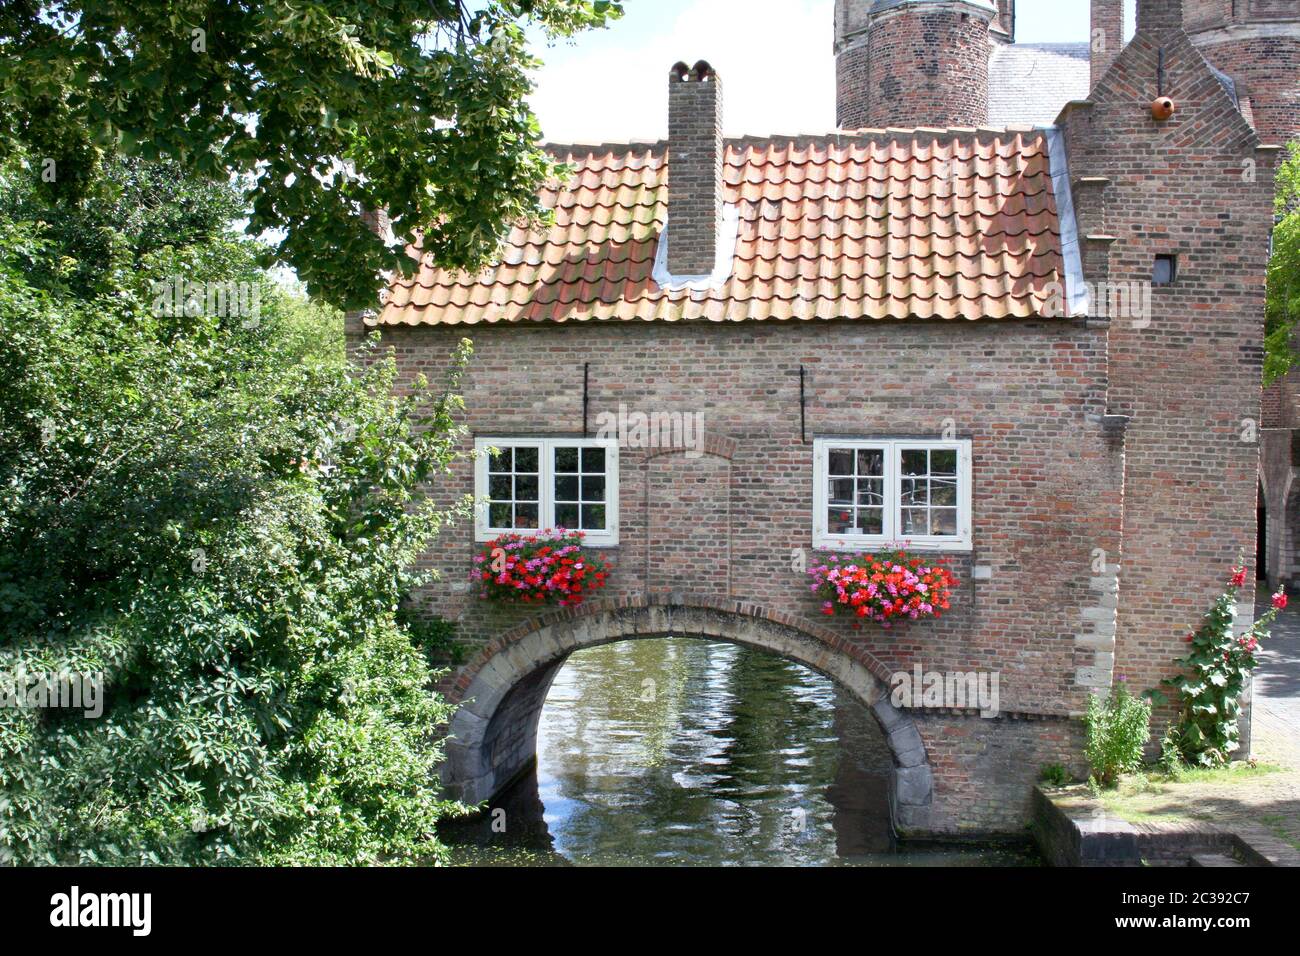 Romantic house with archway over a watercourse Stock Photo